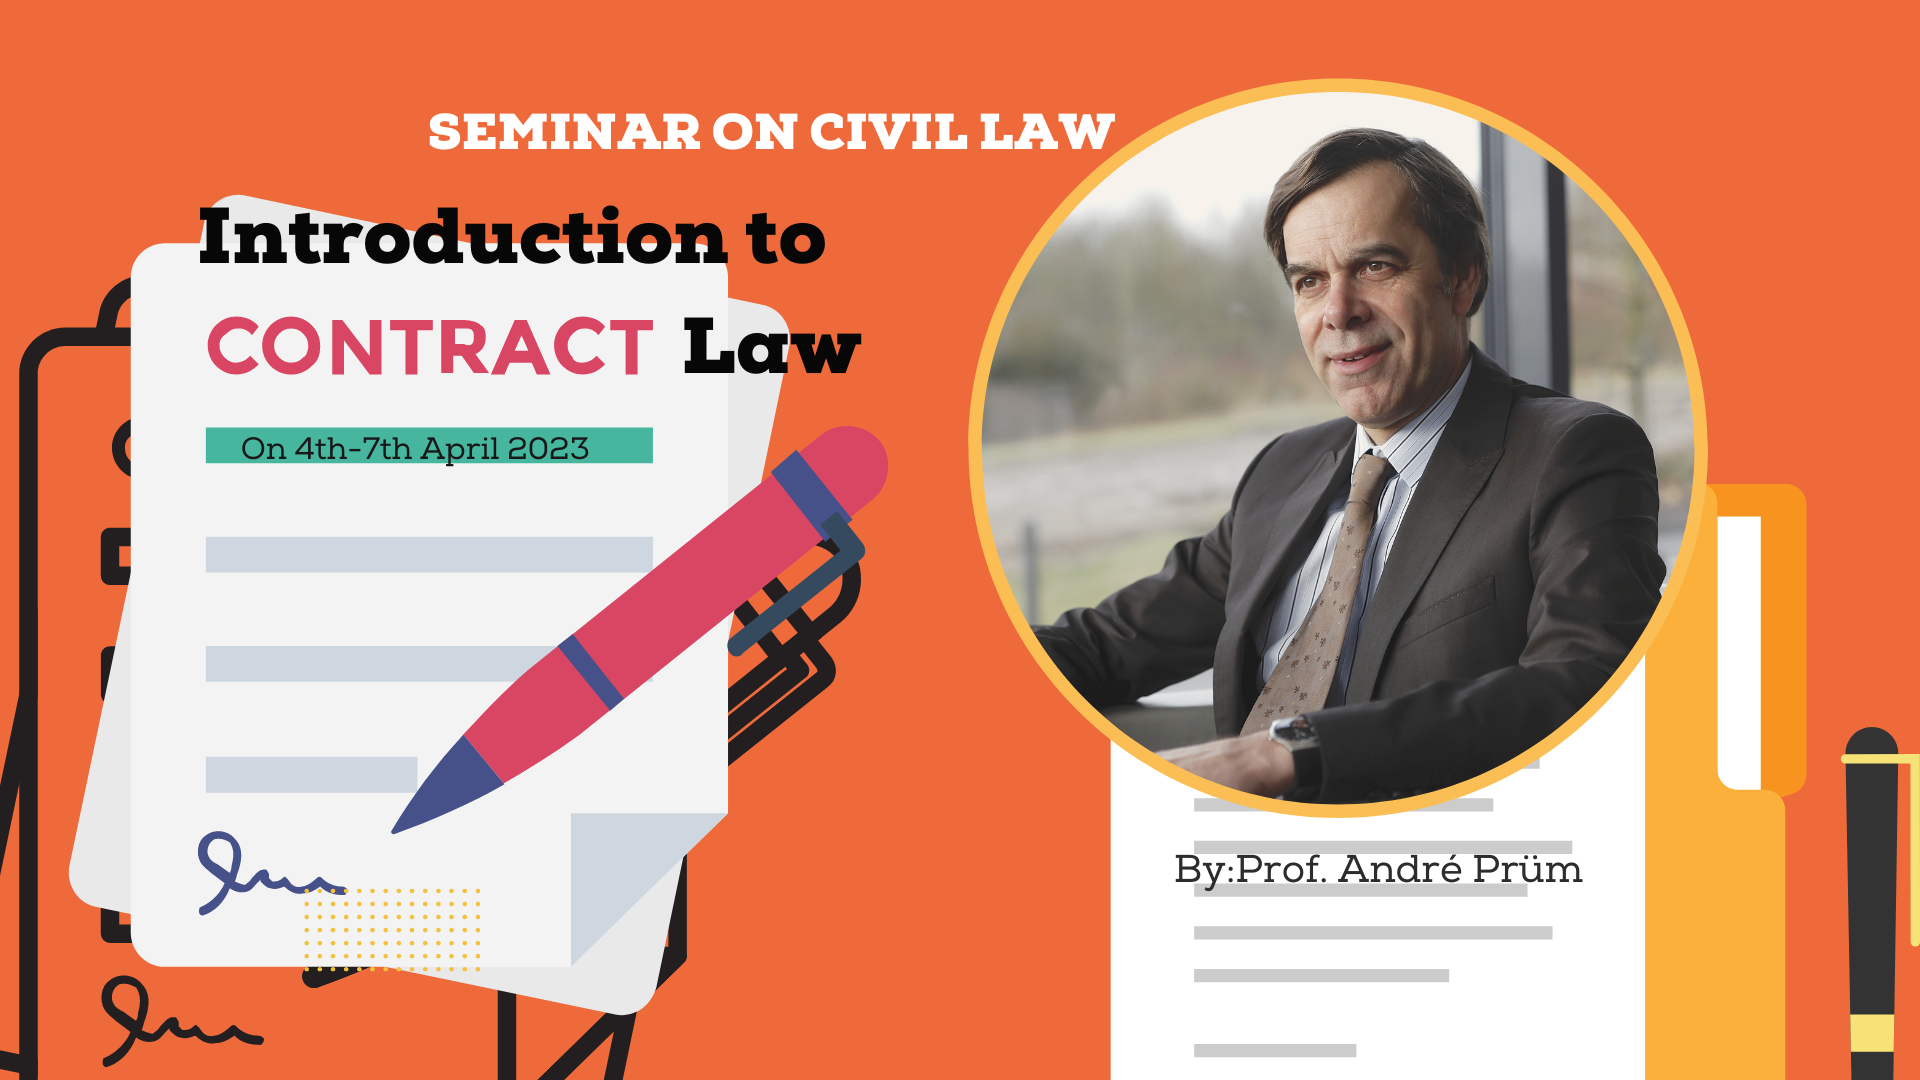 Introduction to Contract Law